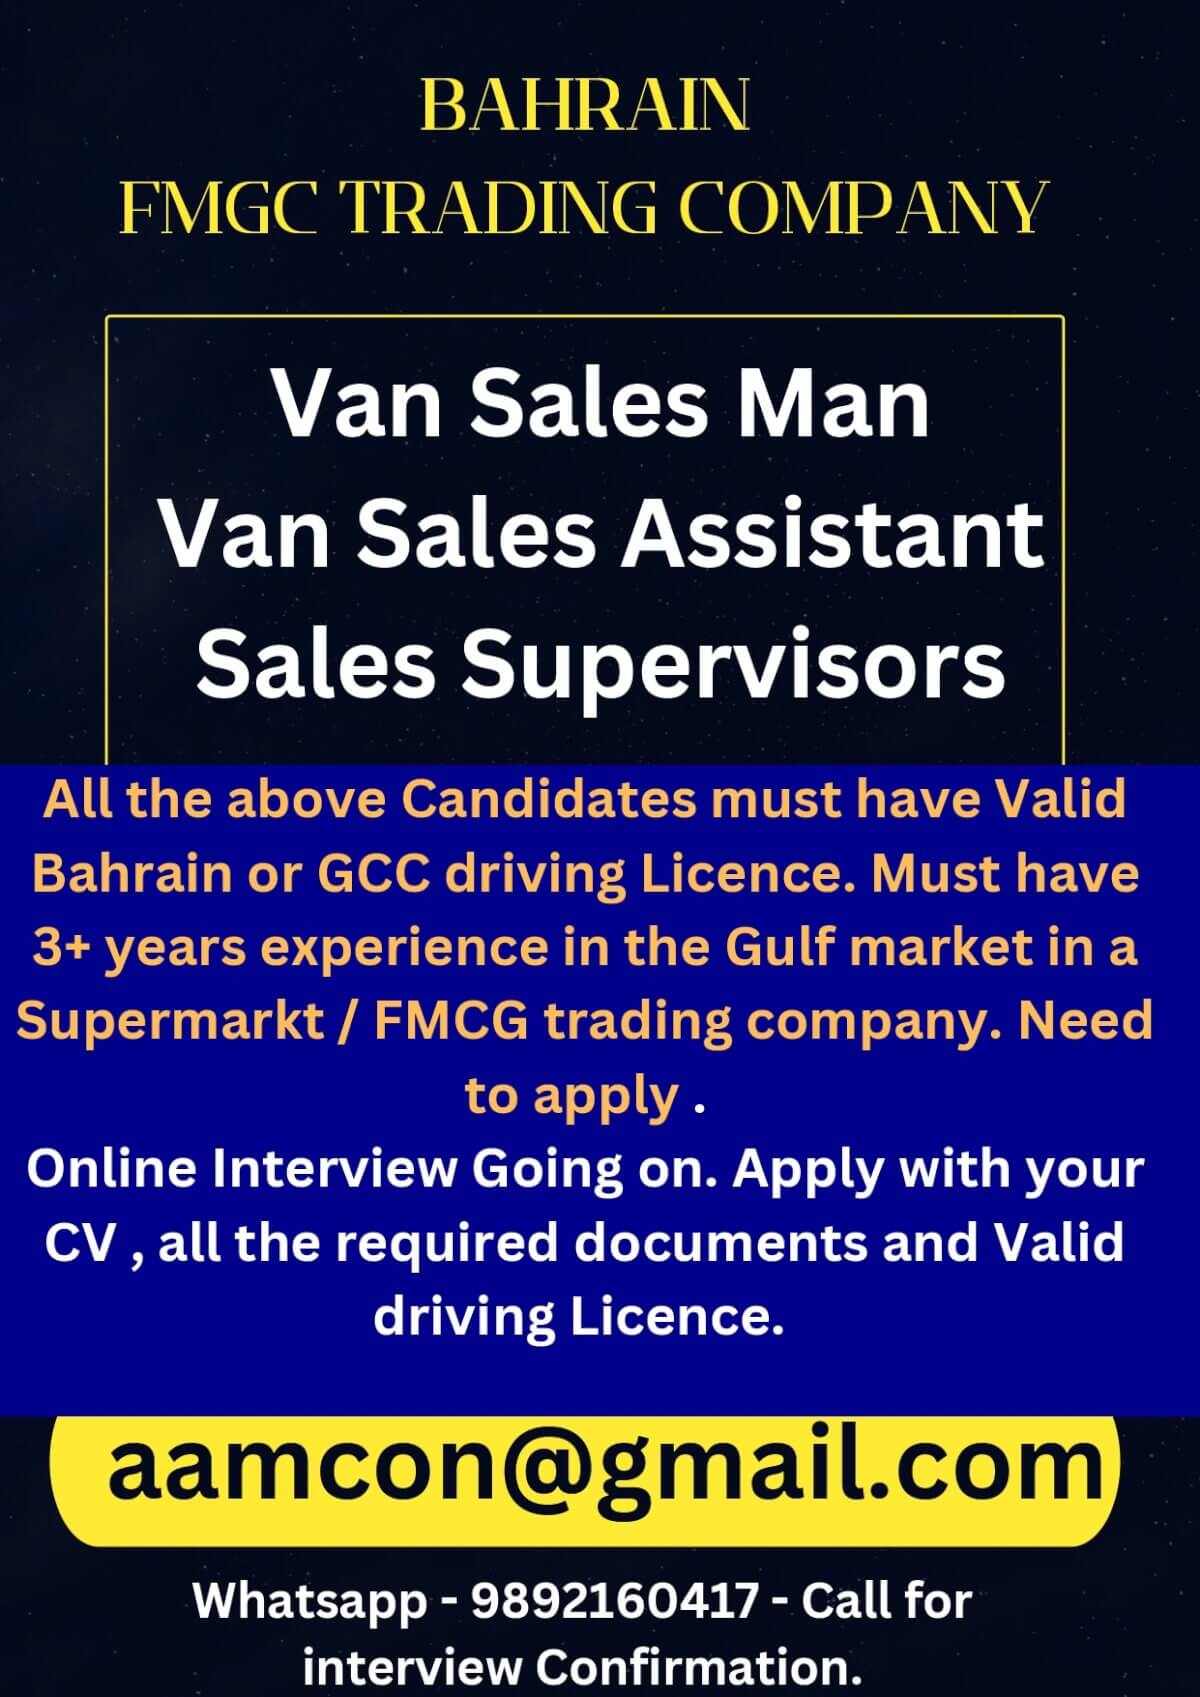 Van sales man required for Bahrain